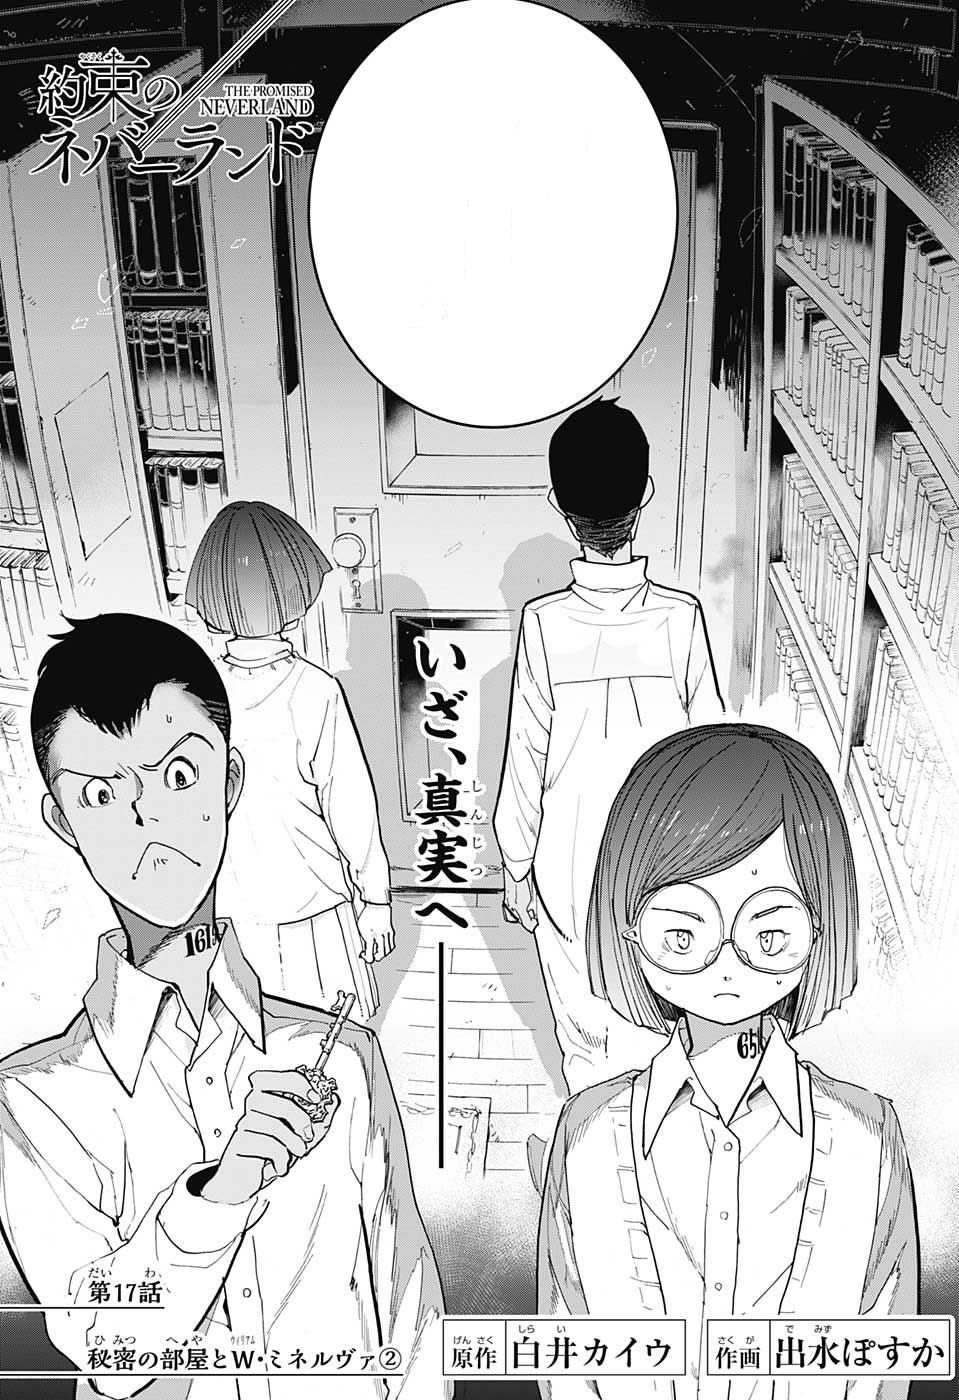 Chapter 172, The Promised Neverland Wiki